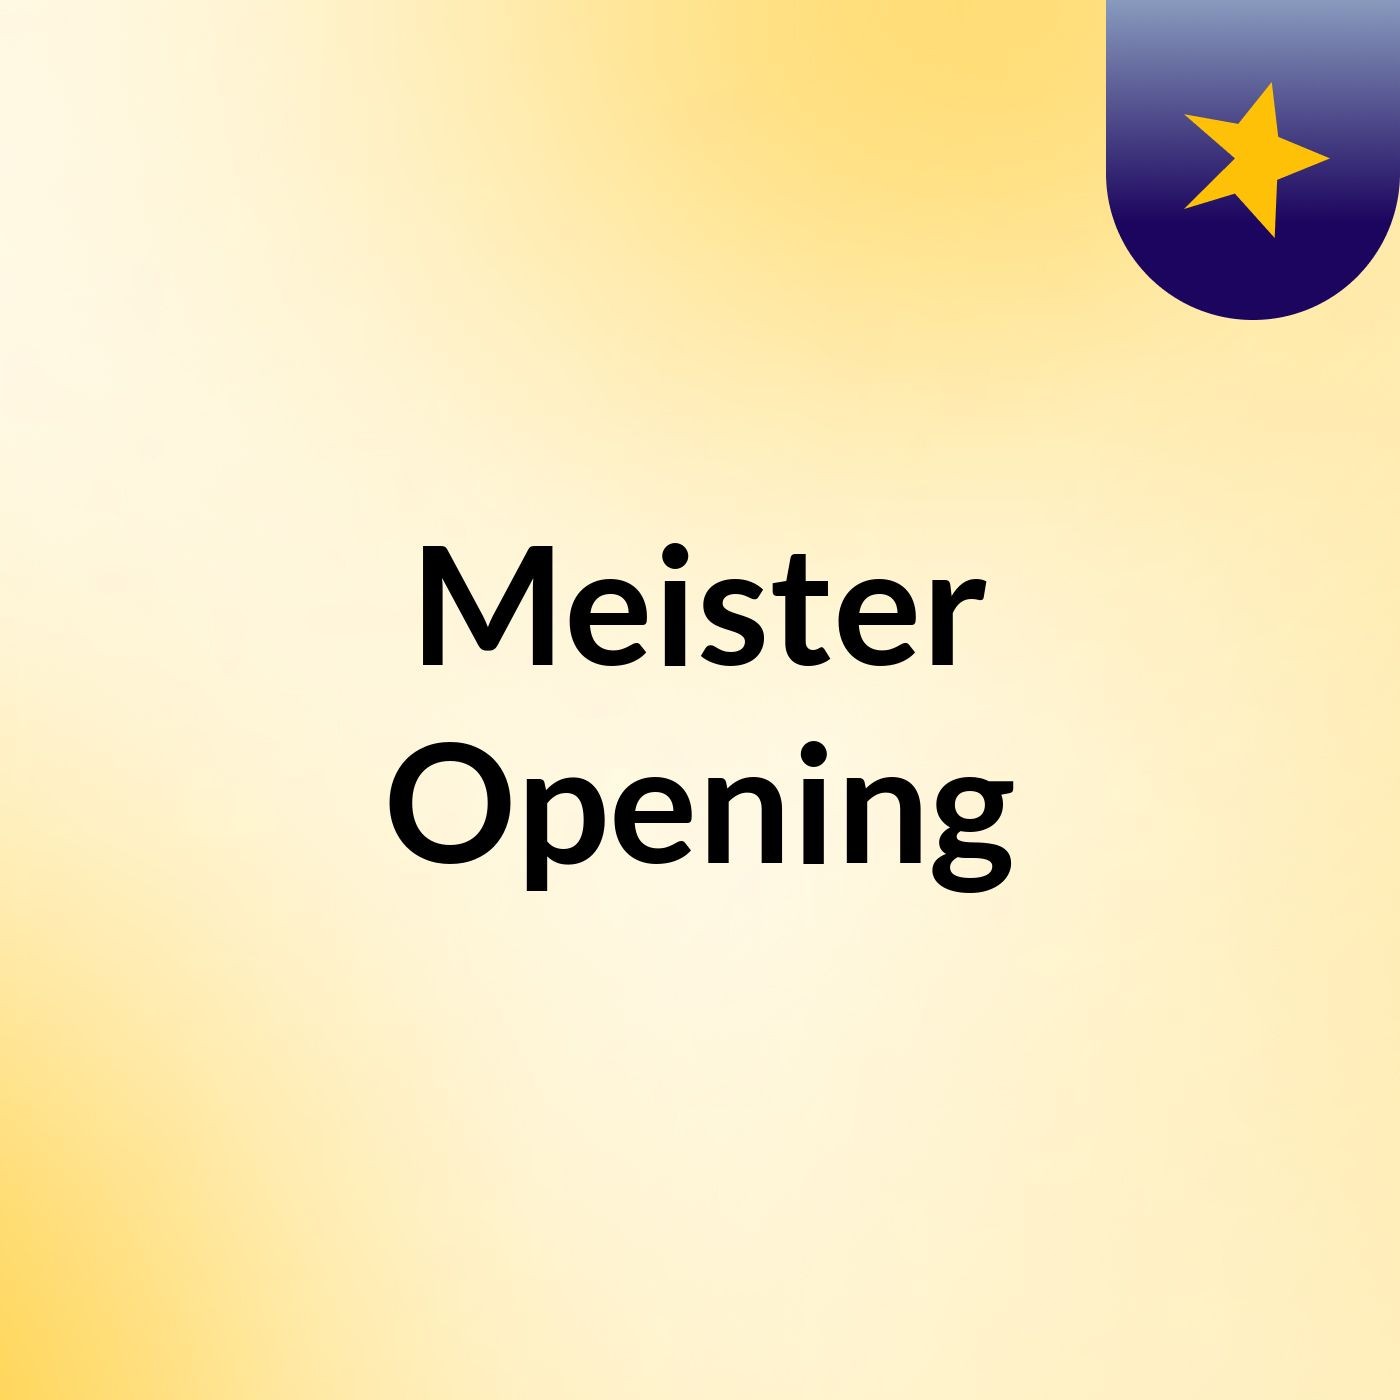 Meister Opening